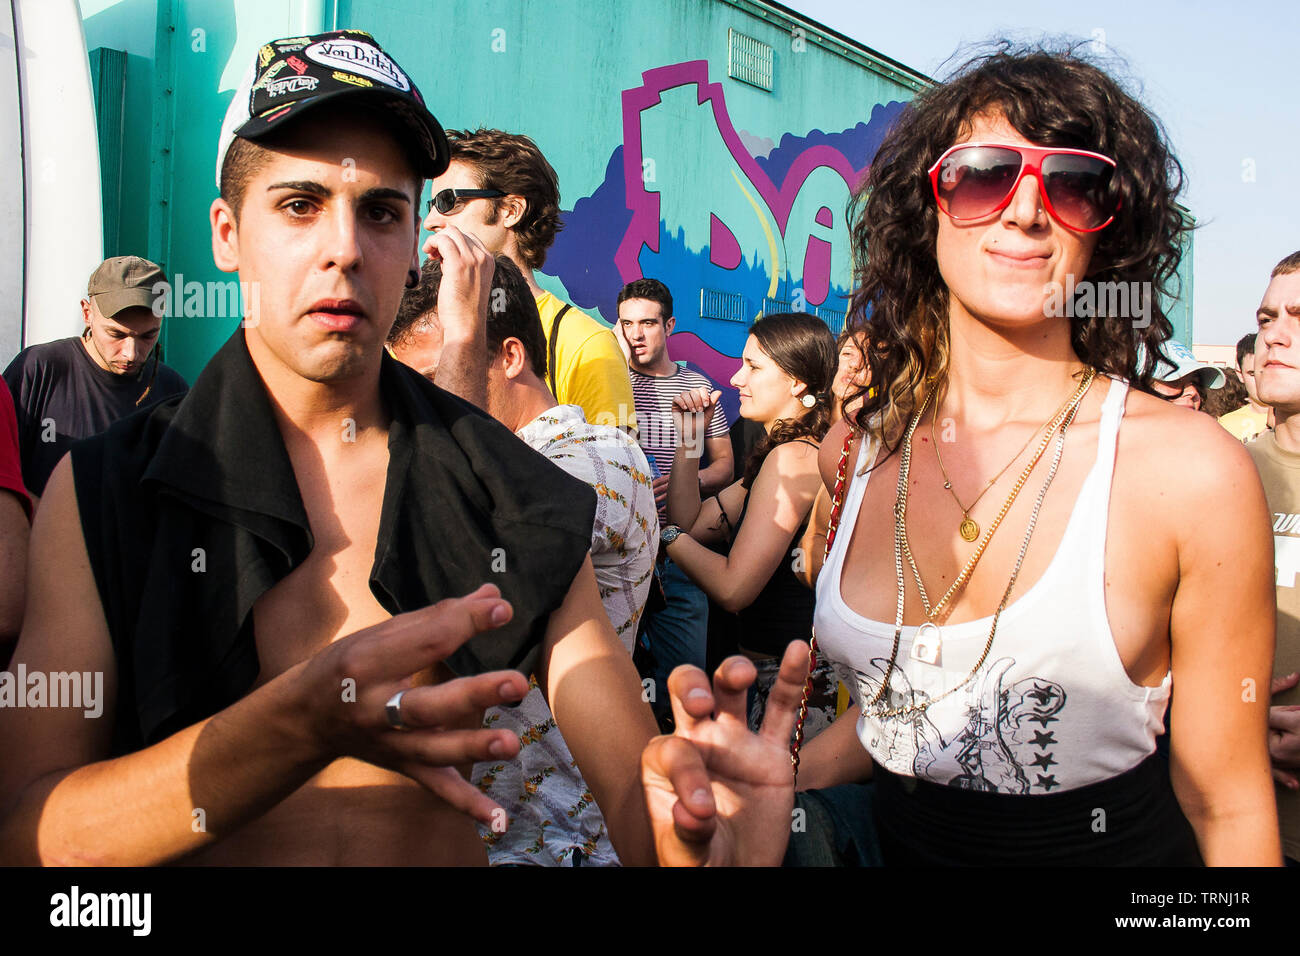 Couple dancing at Anti-Sonar free illegal squat party rave outside Sonar Festival, Barcelona, Spain Stock Photo